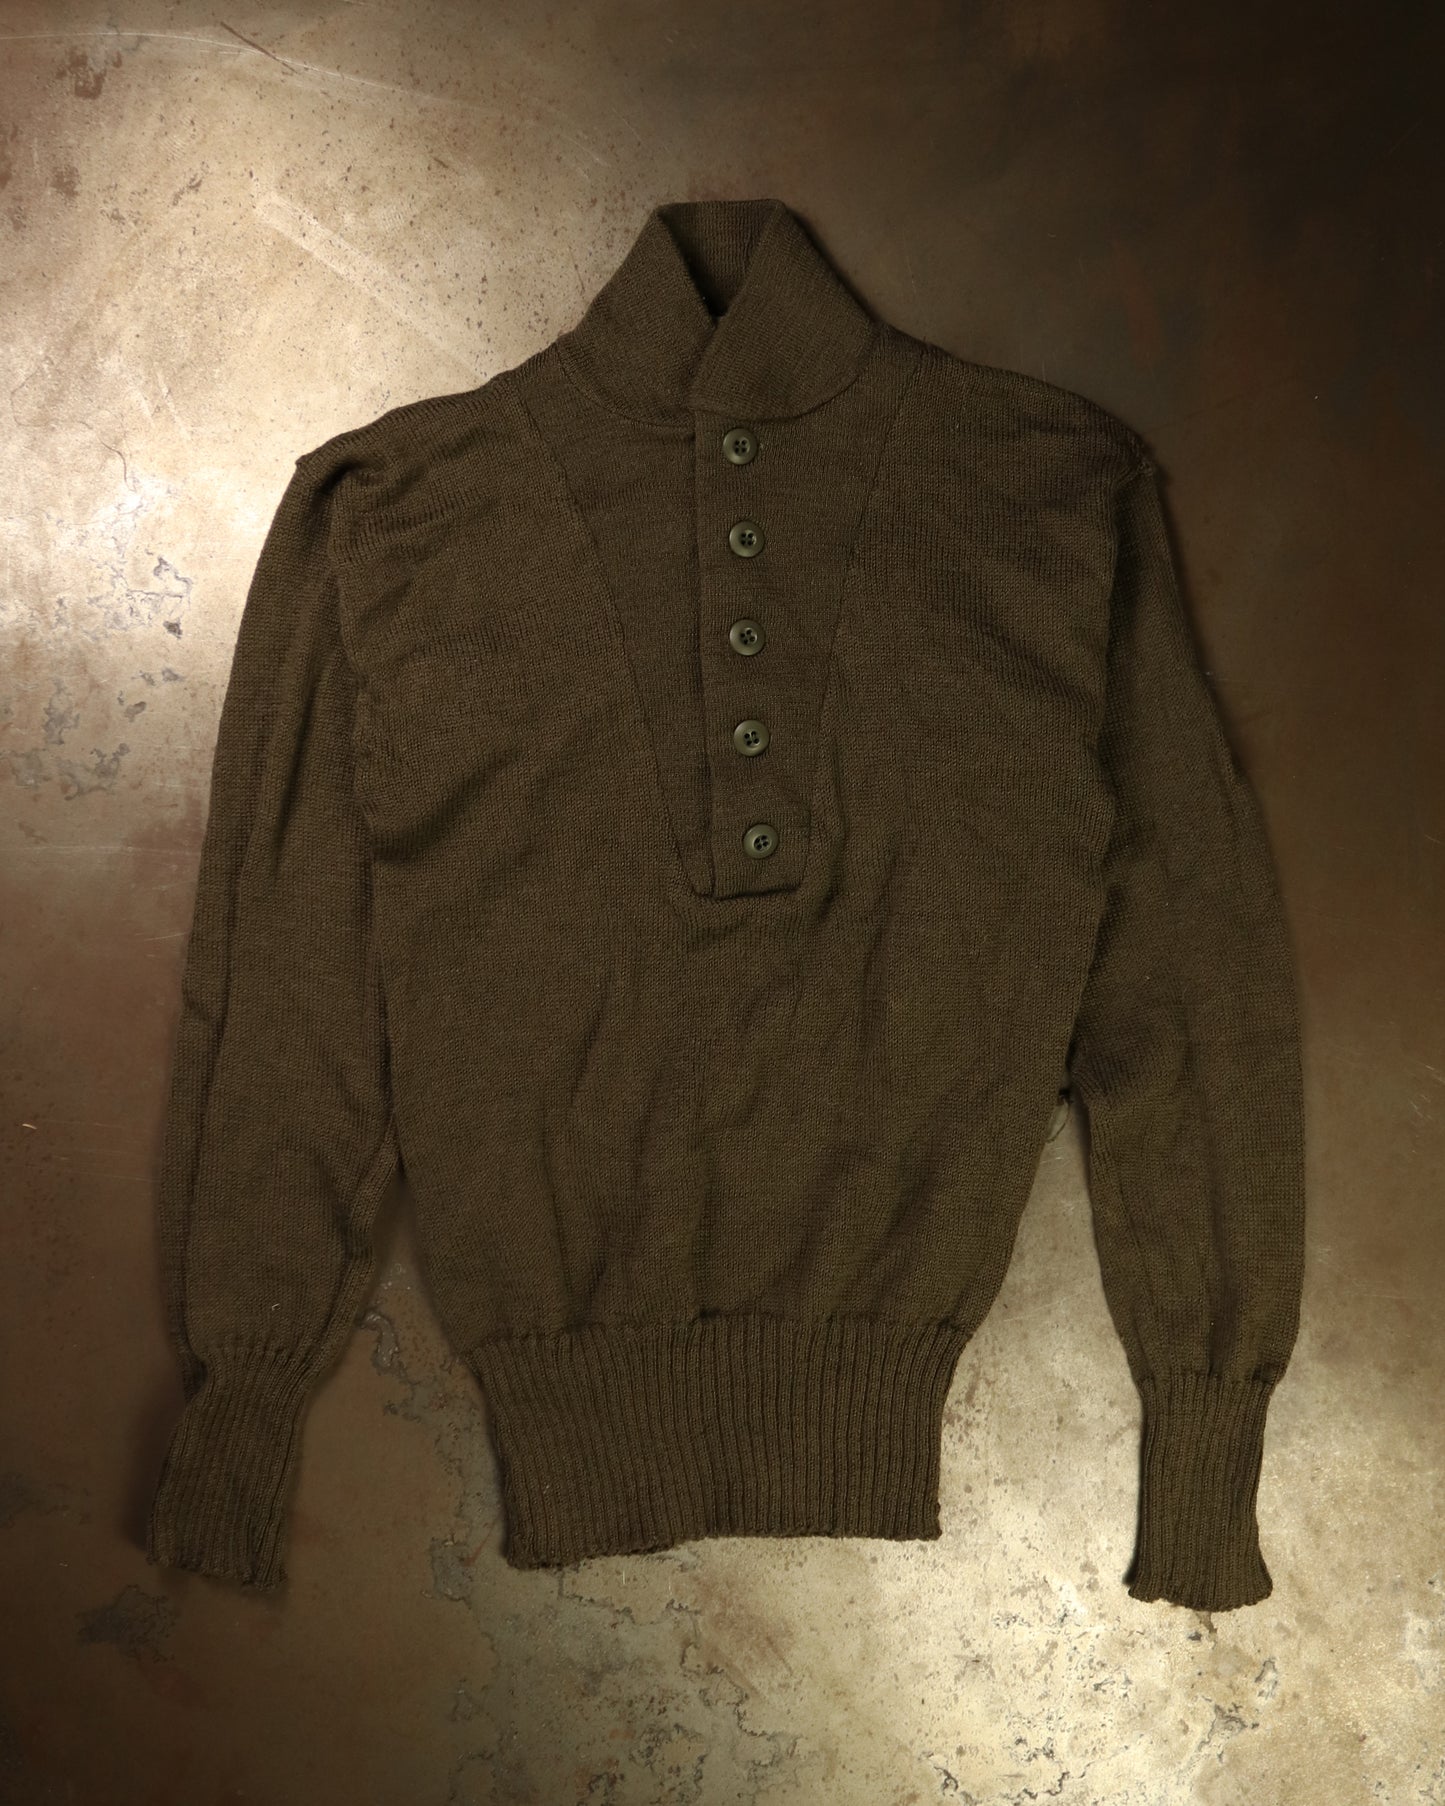 1960’s US Army wool knit sweater